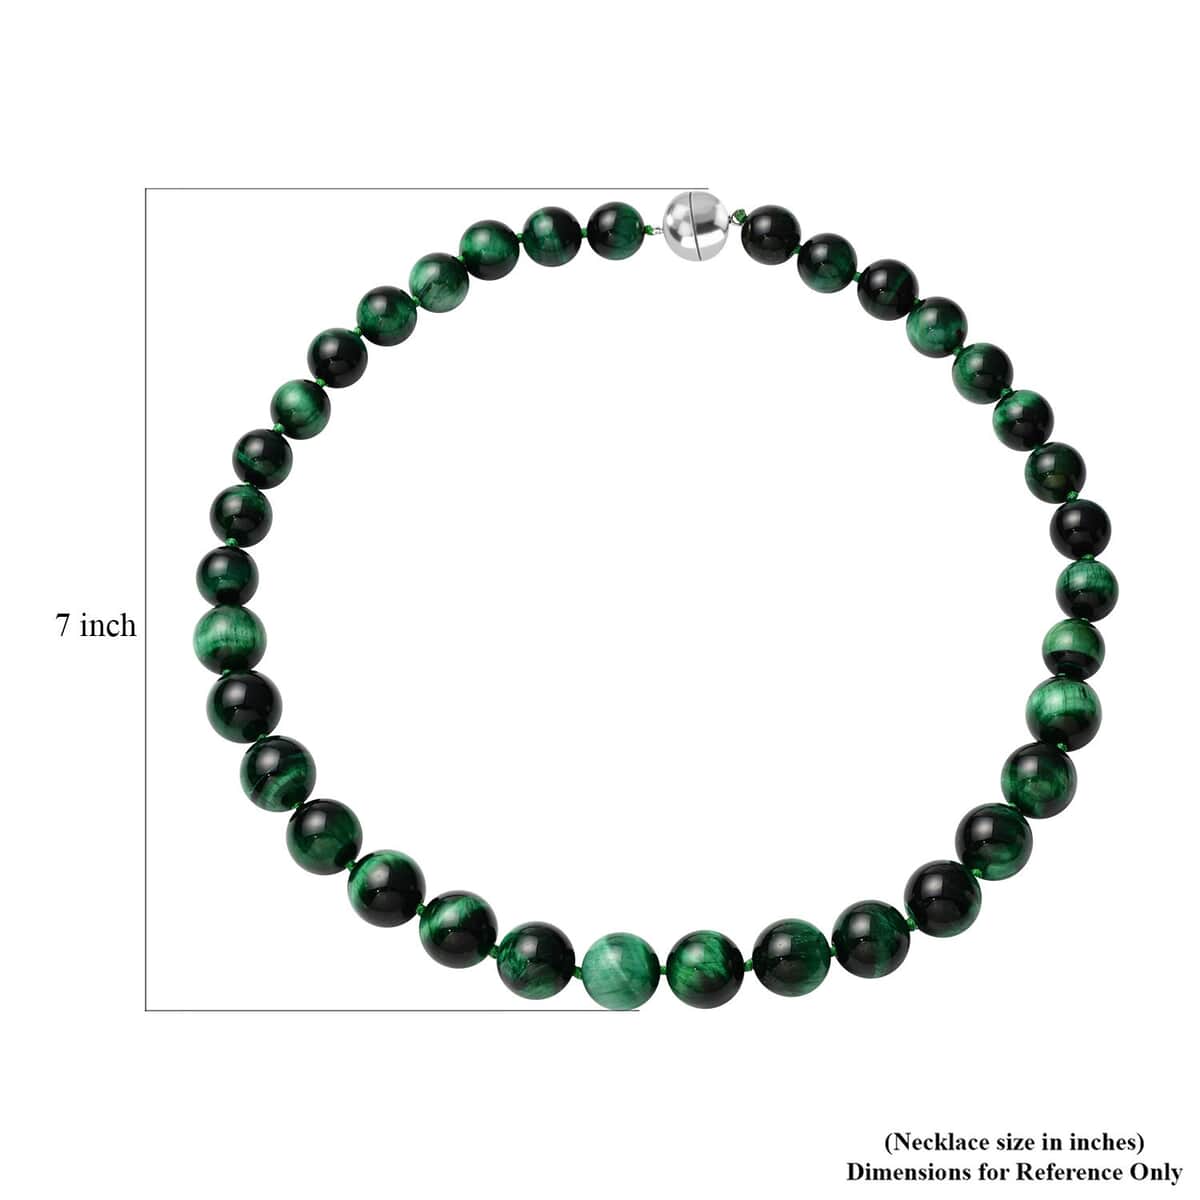 Premium Green Tiger's Eye Necklace in Rhodium Over Sterling Silver, Beaded Necklace, Bead Jewelry, Birthday Gifts 607.50 ctw (20 Inches) image number 4